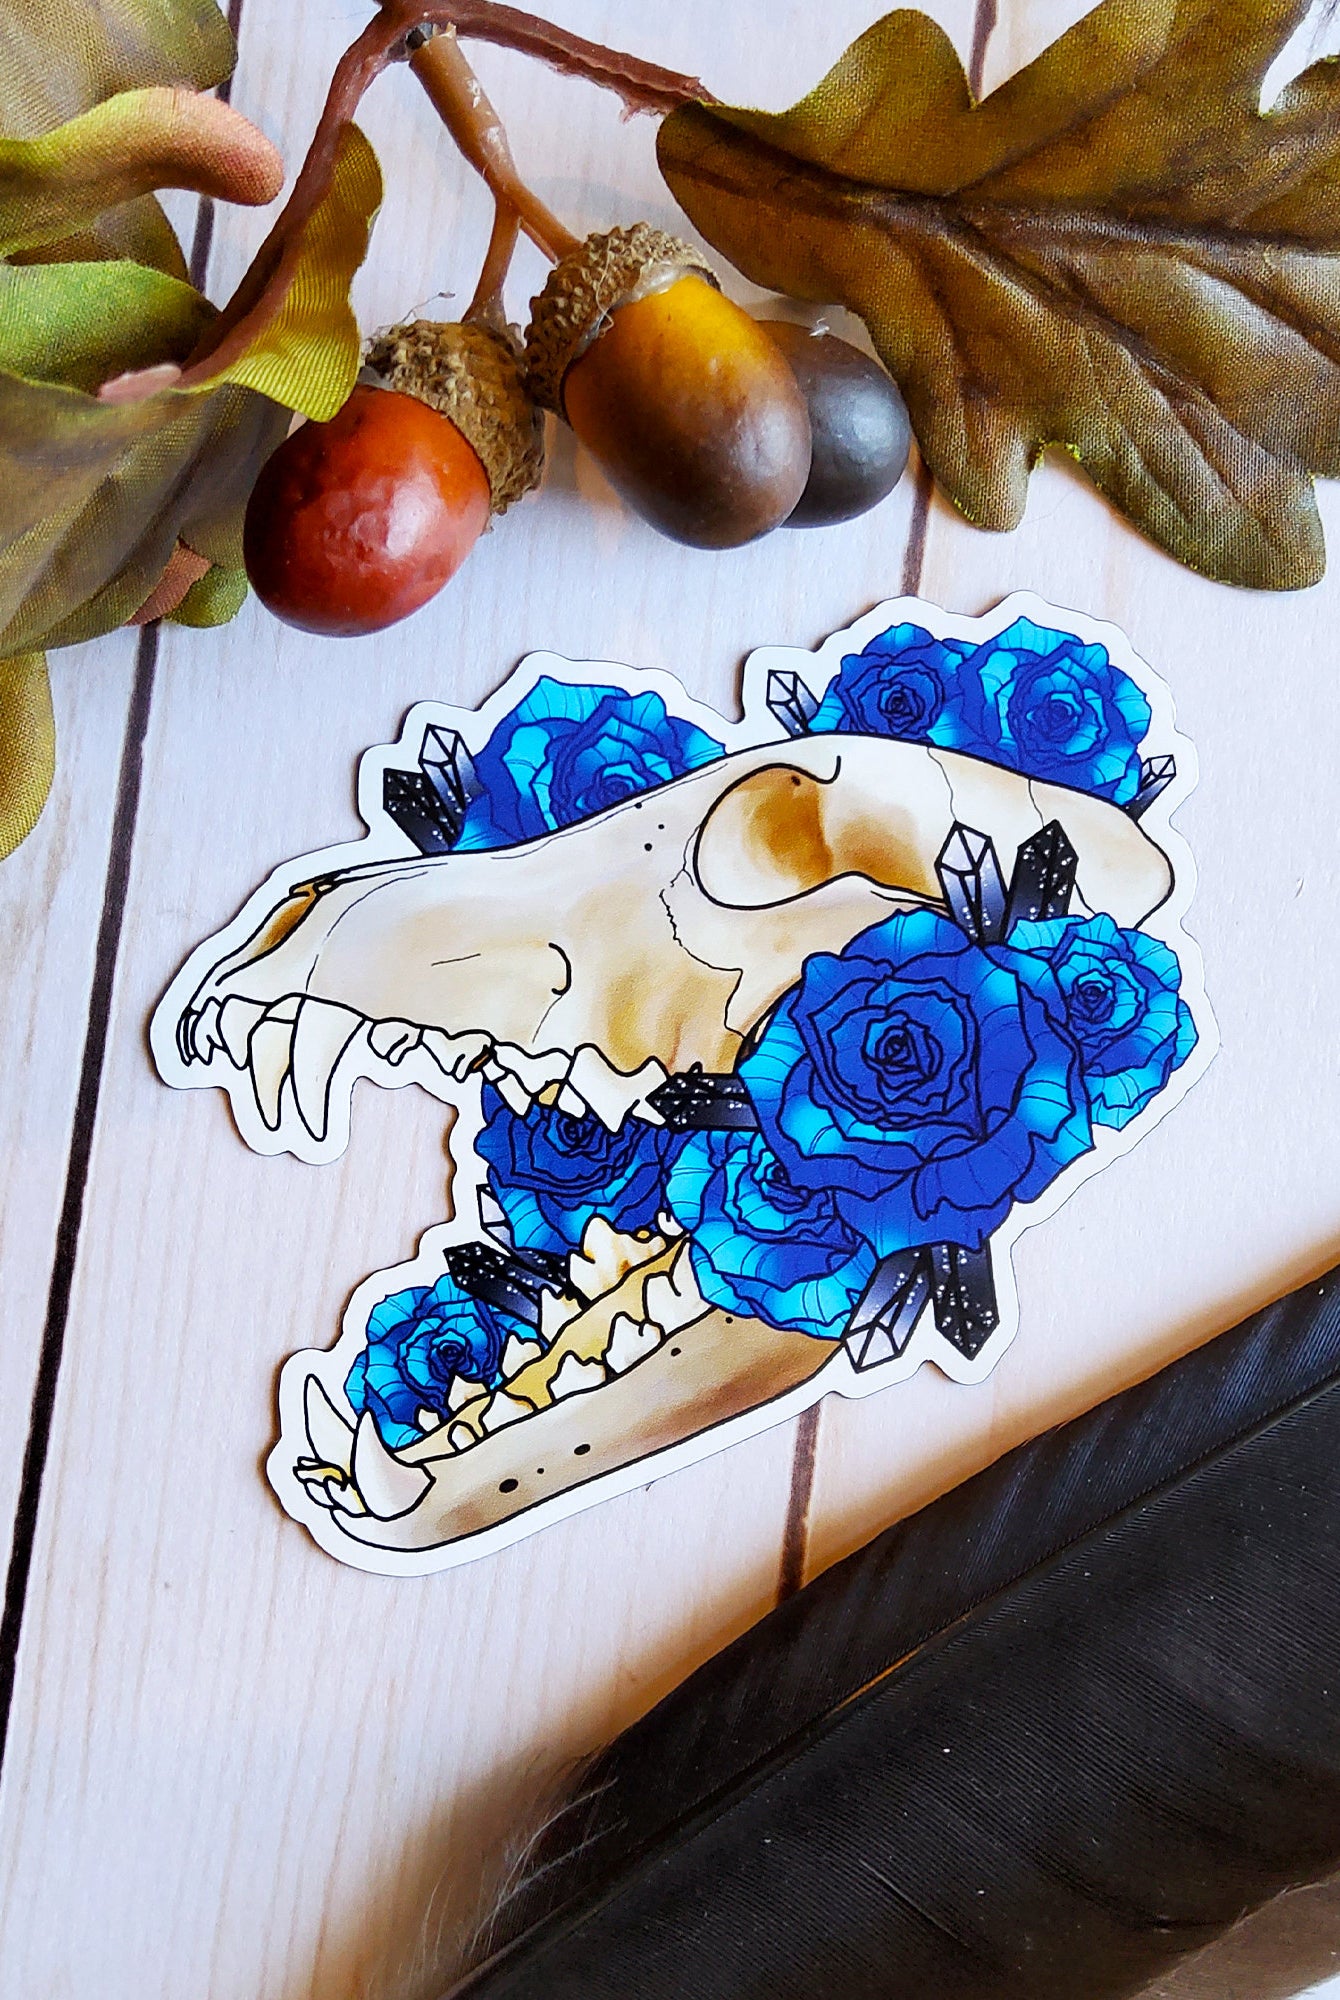 MAGNET: Wolf Skull and Blue Roses Decorative , Wolf Skull Magnet , Skull and Roses Magnet , Skull Magnet , Skull Art Decorative Magnet